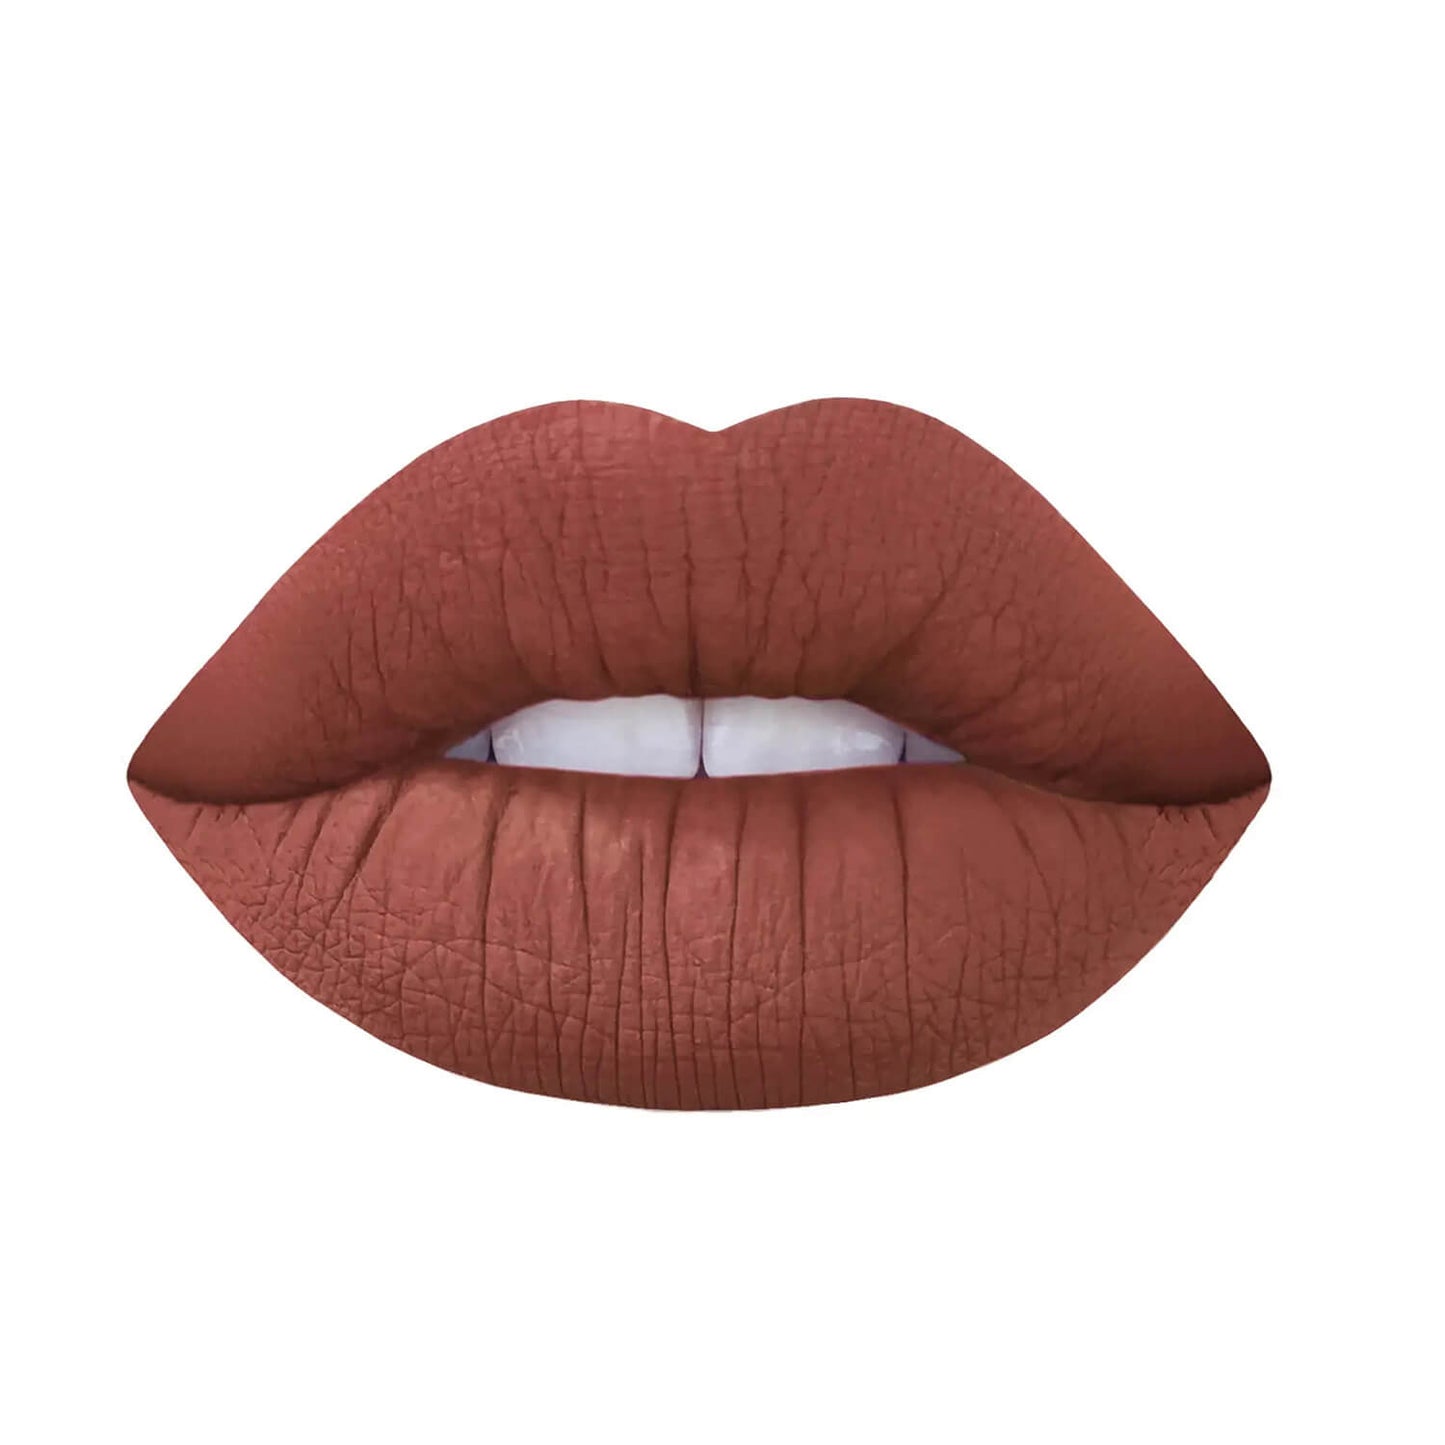 Lime Crime Matte Velvetines Lipstick cindy shade available at Heygirl.pk for delivery in Pakistan.